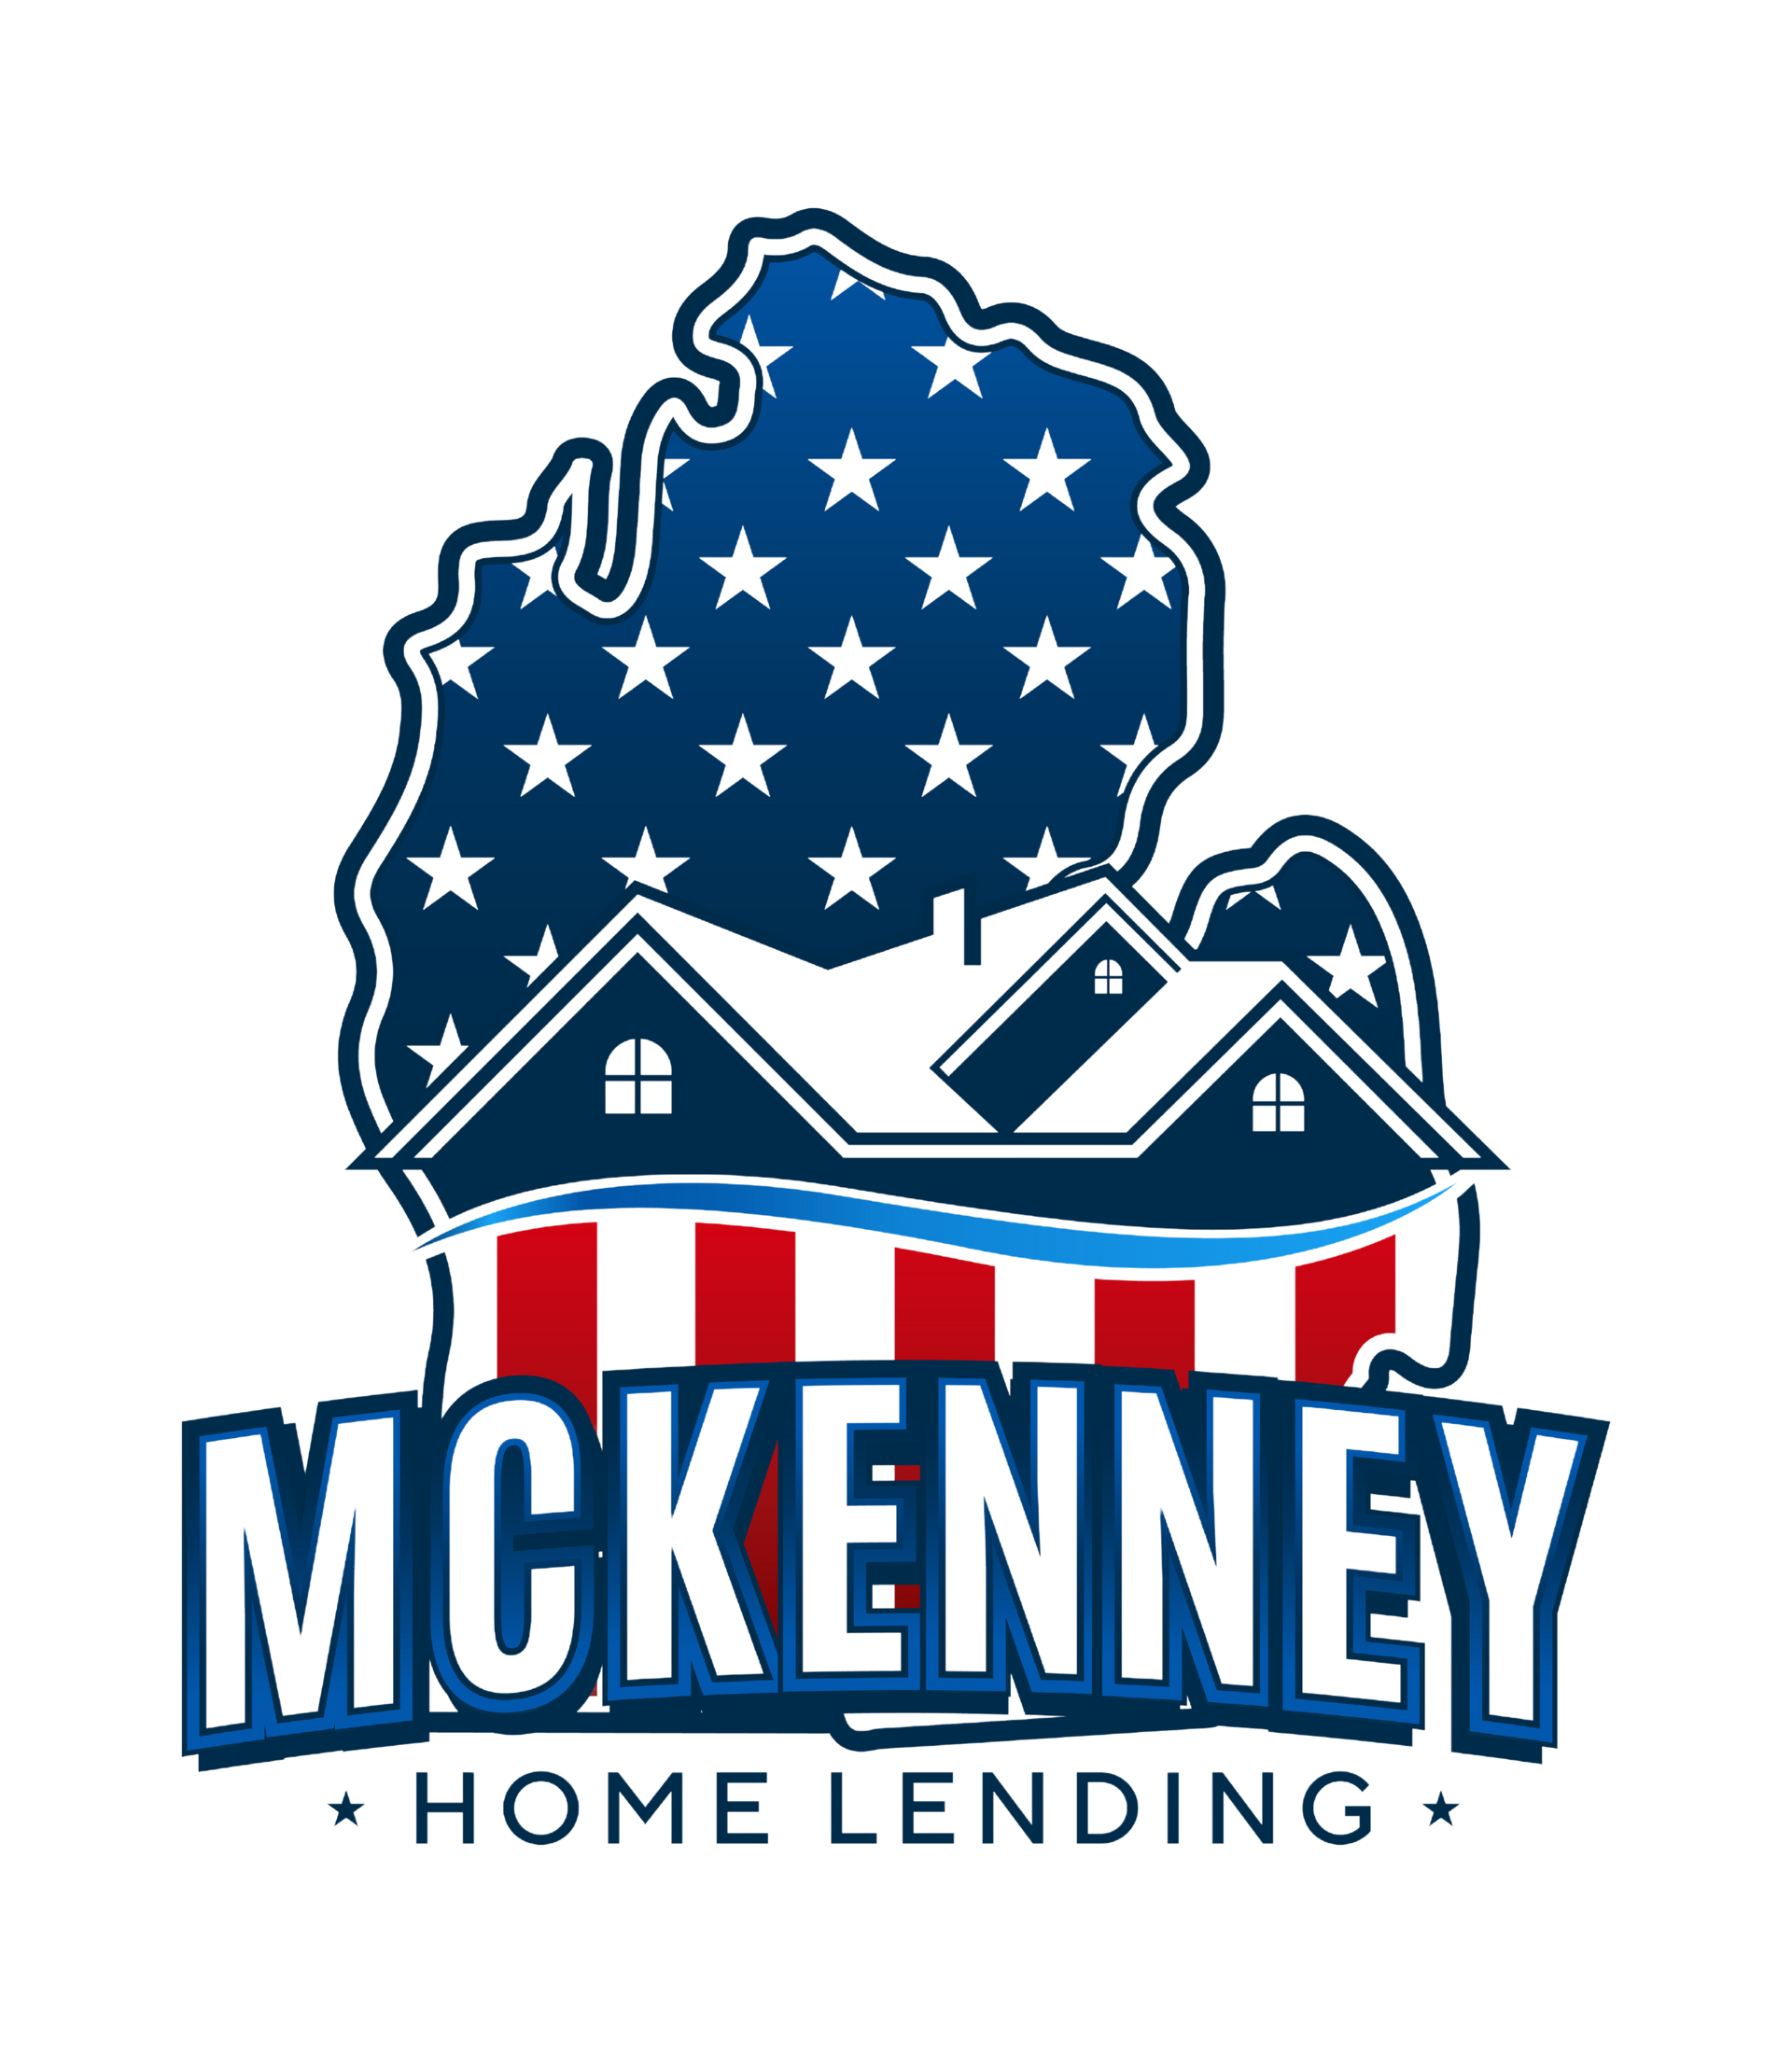 the logo for mckenney home lending shows a house and an american flag .